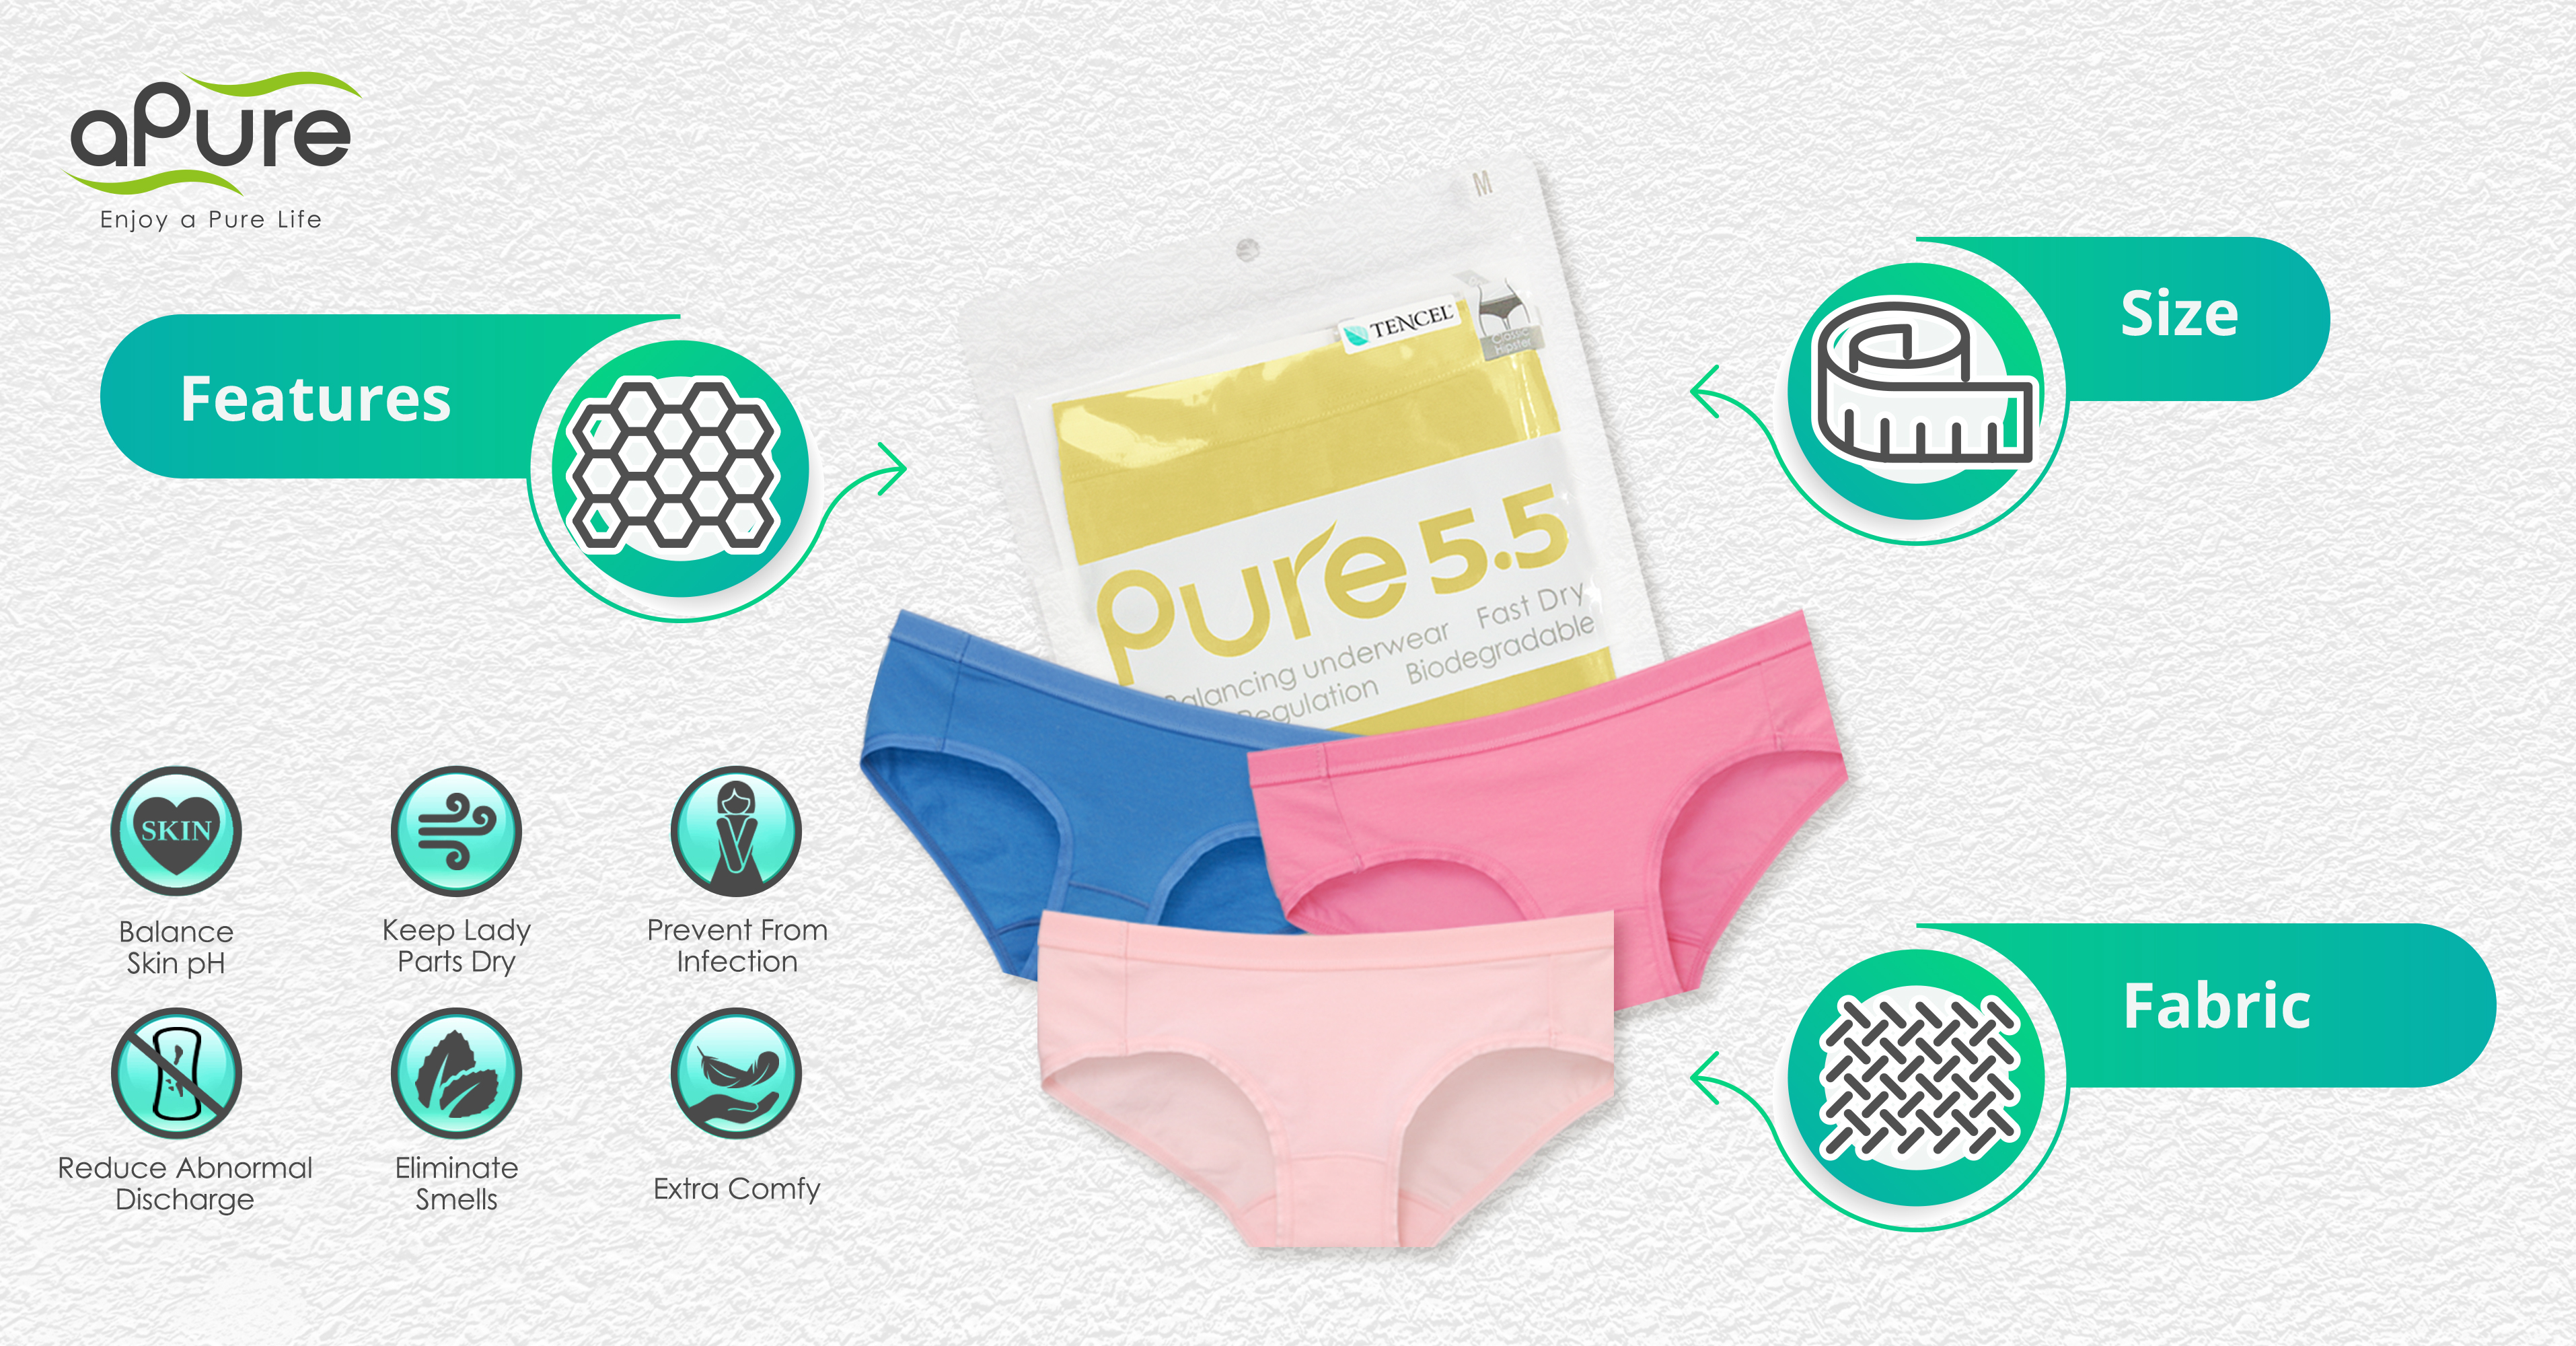 5 pro tips you should know before shopping for underwear